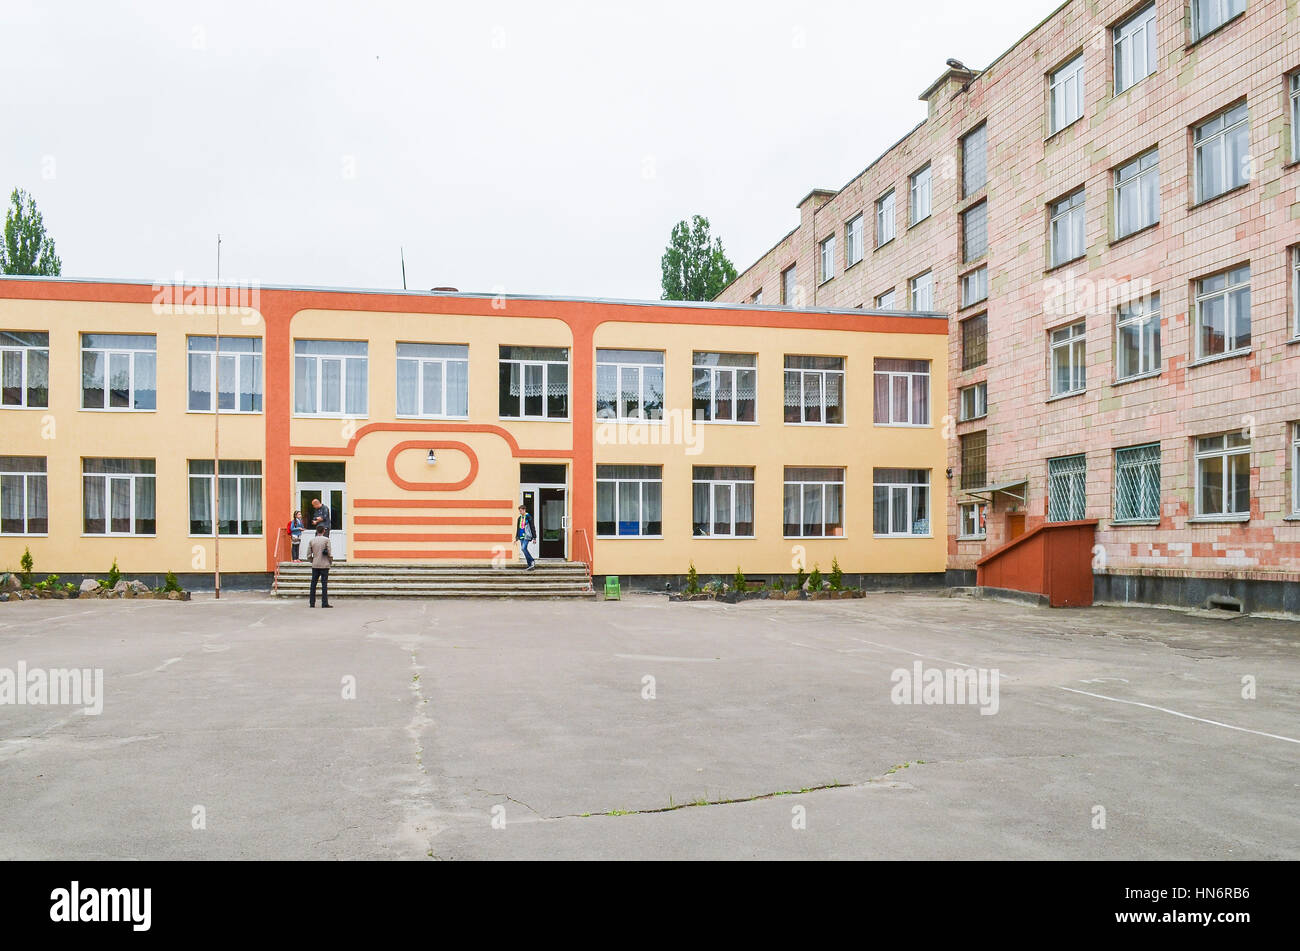 Rivne, Ukraine - May 14, 2013: Secondary school number 13 entrance with people walking Stock Photo